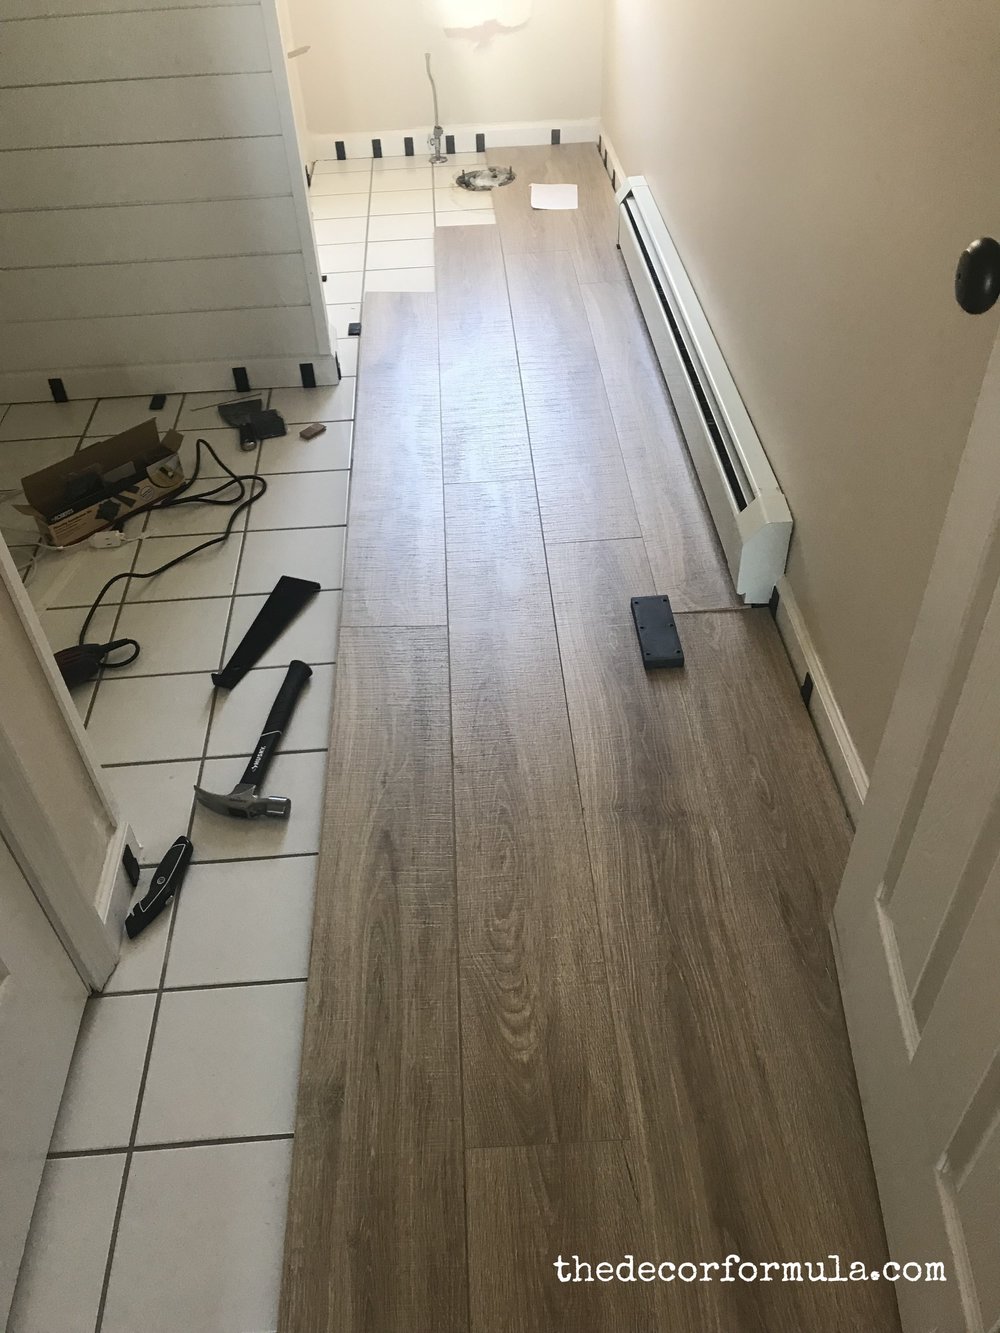 Ideas For Covering Up Tile Floors, Laying Laminate Flooring Over Ceramic Tile